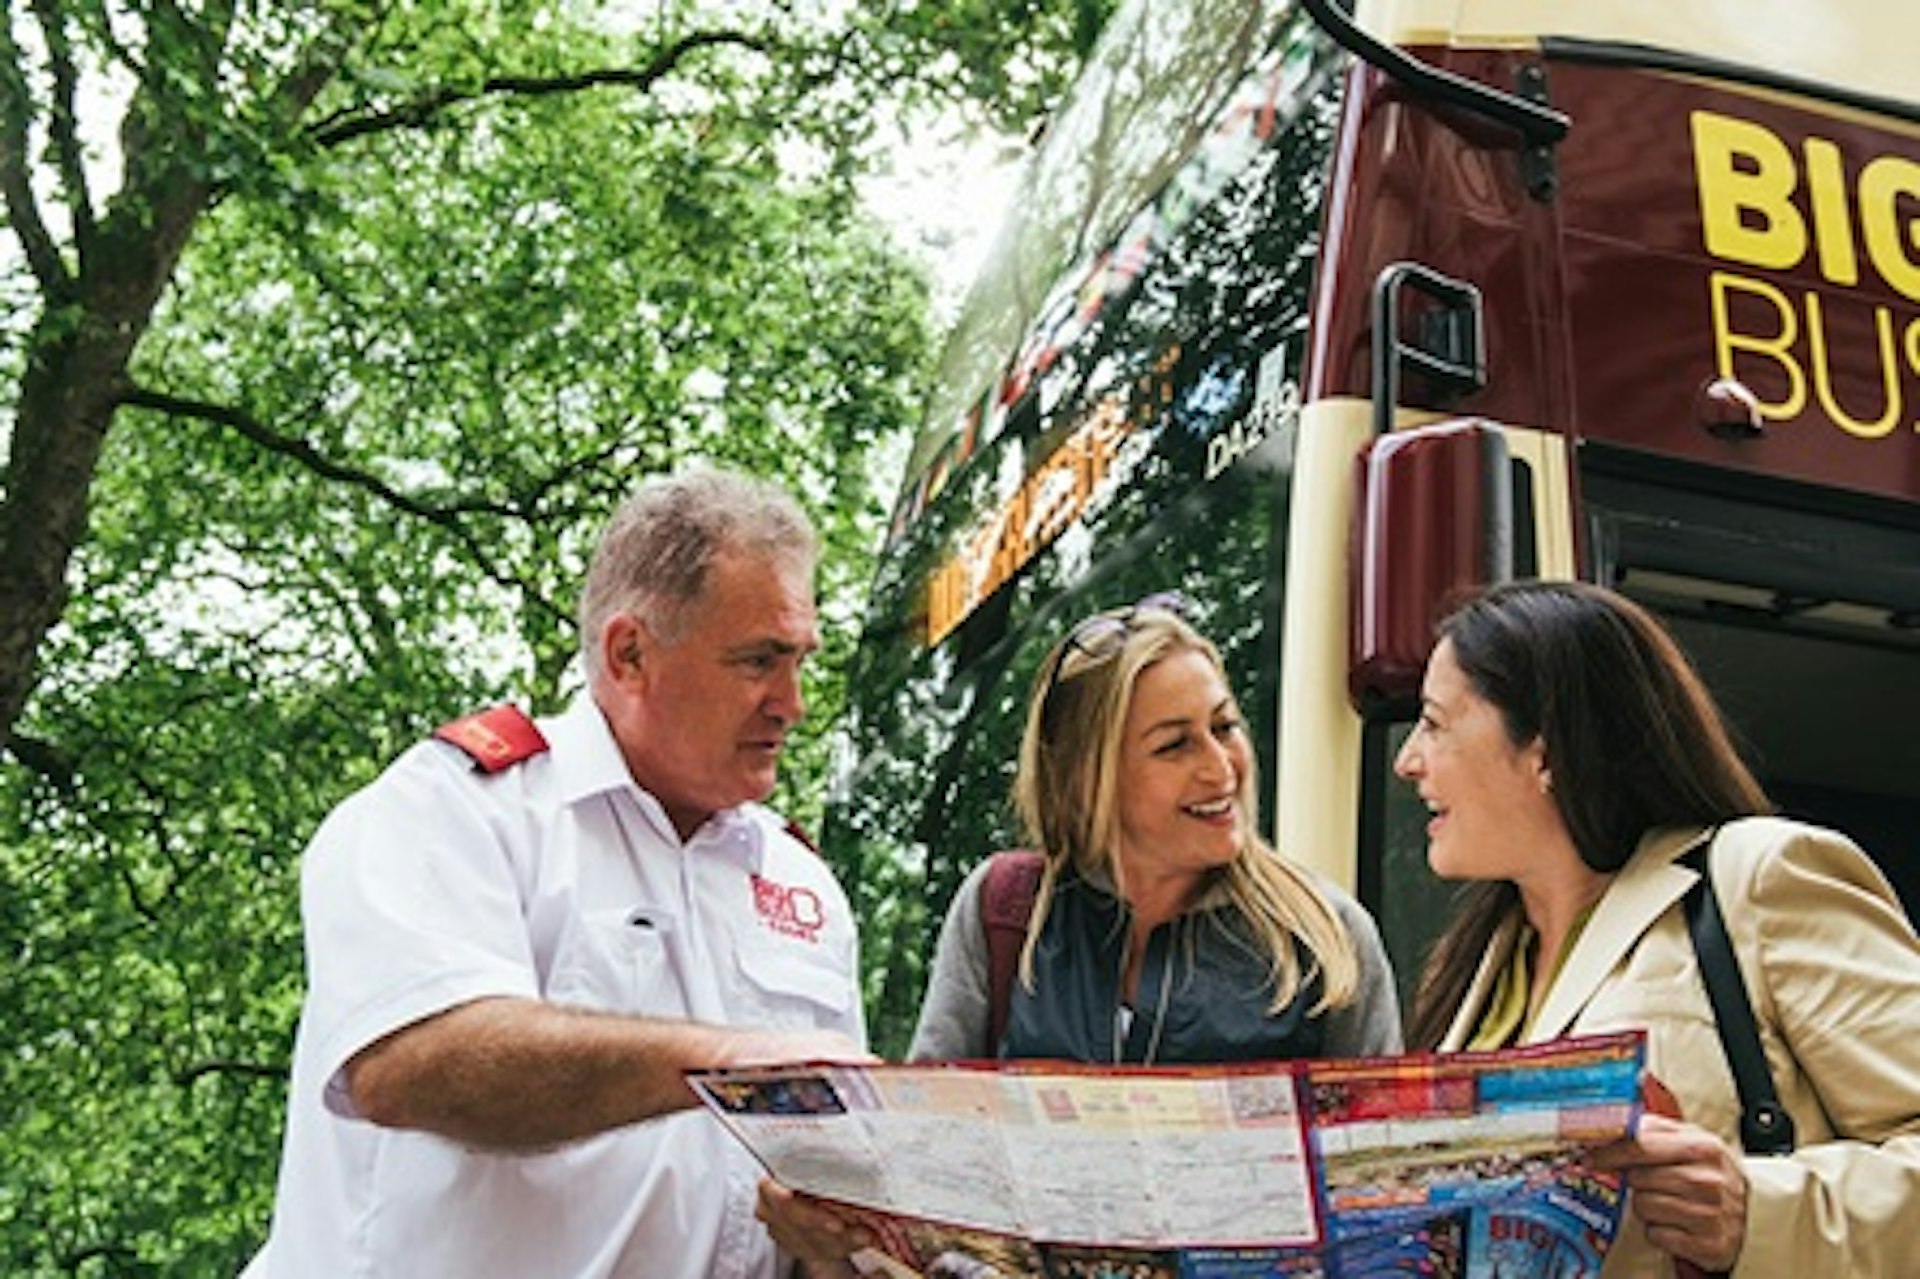 Explore London with Sightseeing Bus Tour, River Cruise and London Eye for Two 3